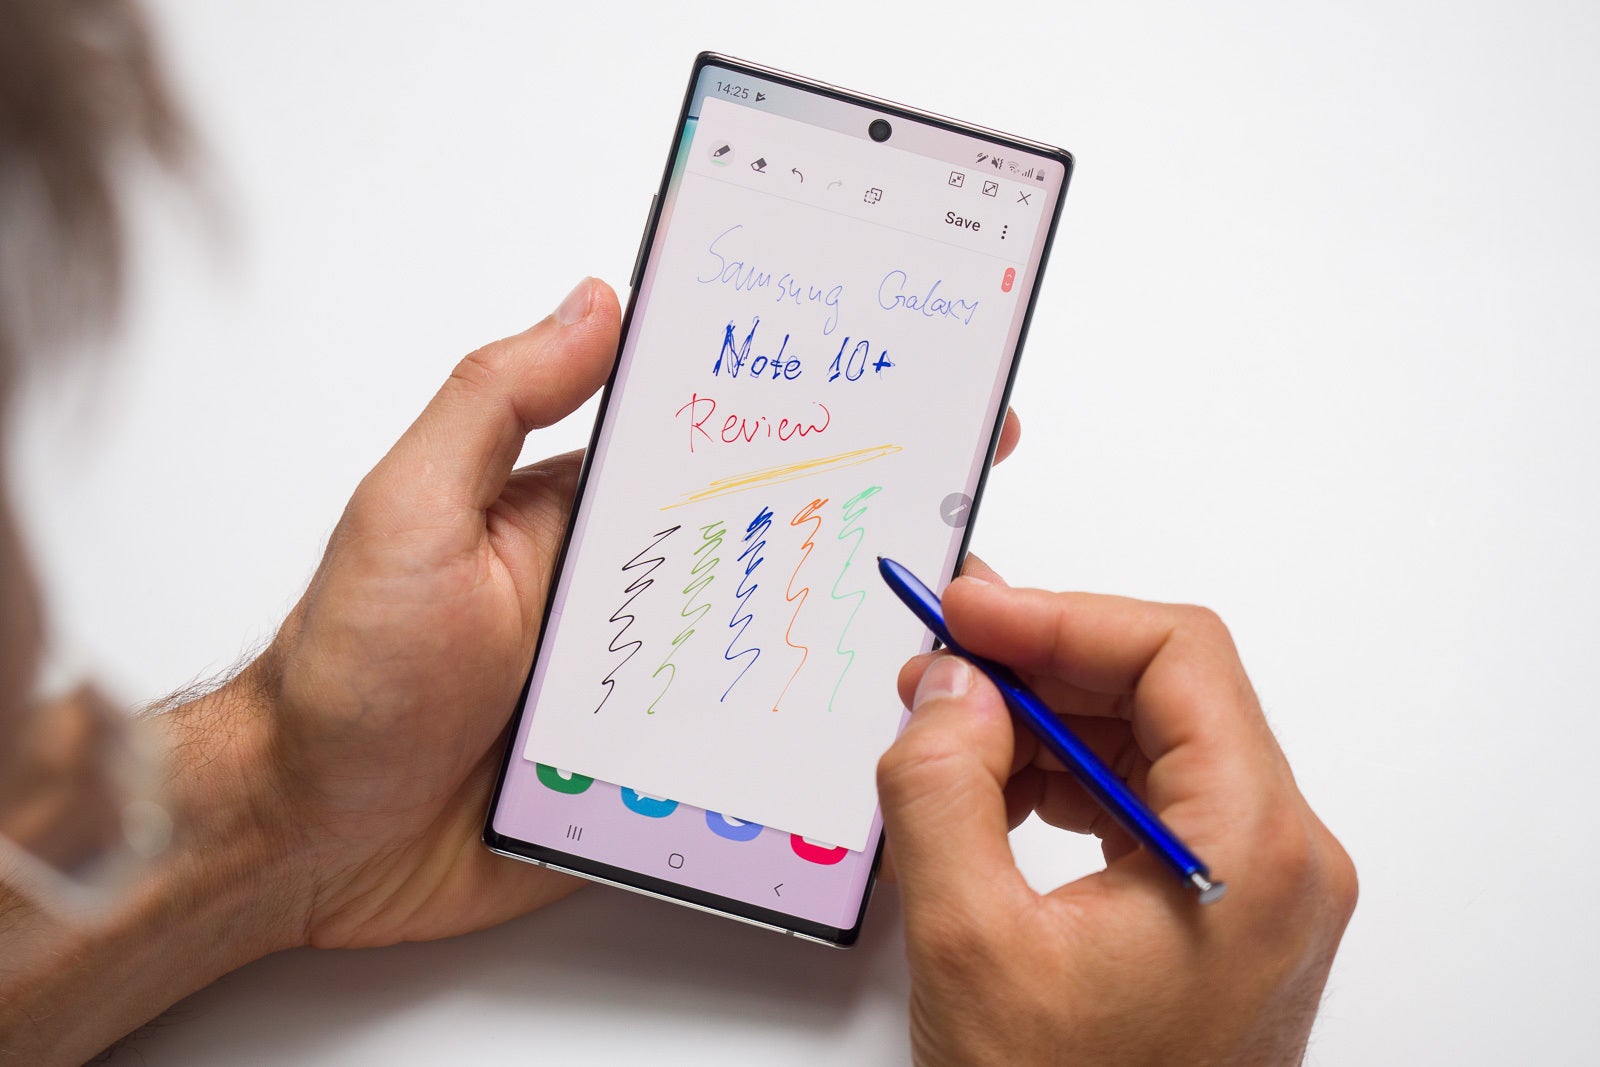 The Galaxy Note 10+ - What happened in mobile tech in 2019: a month-by-month recap